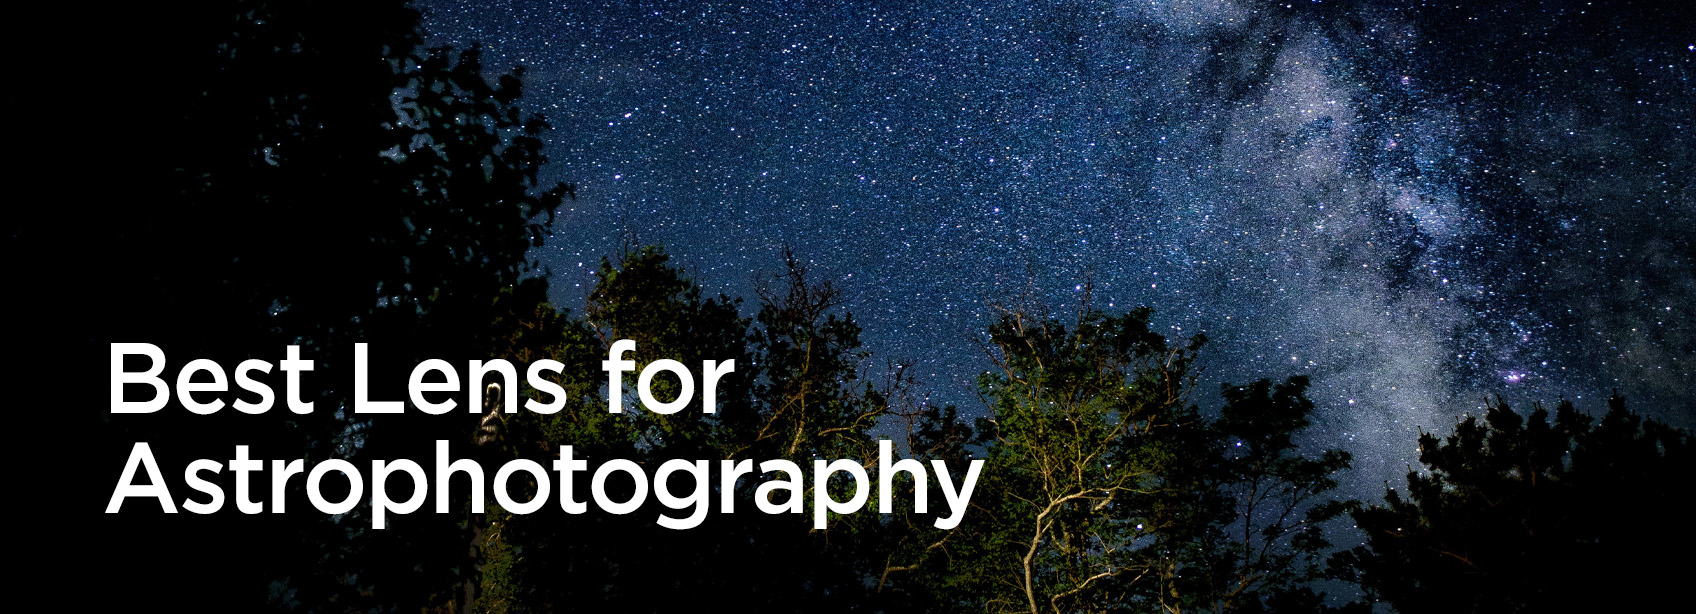 best lens for astrophotography